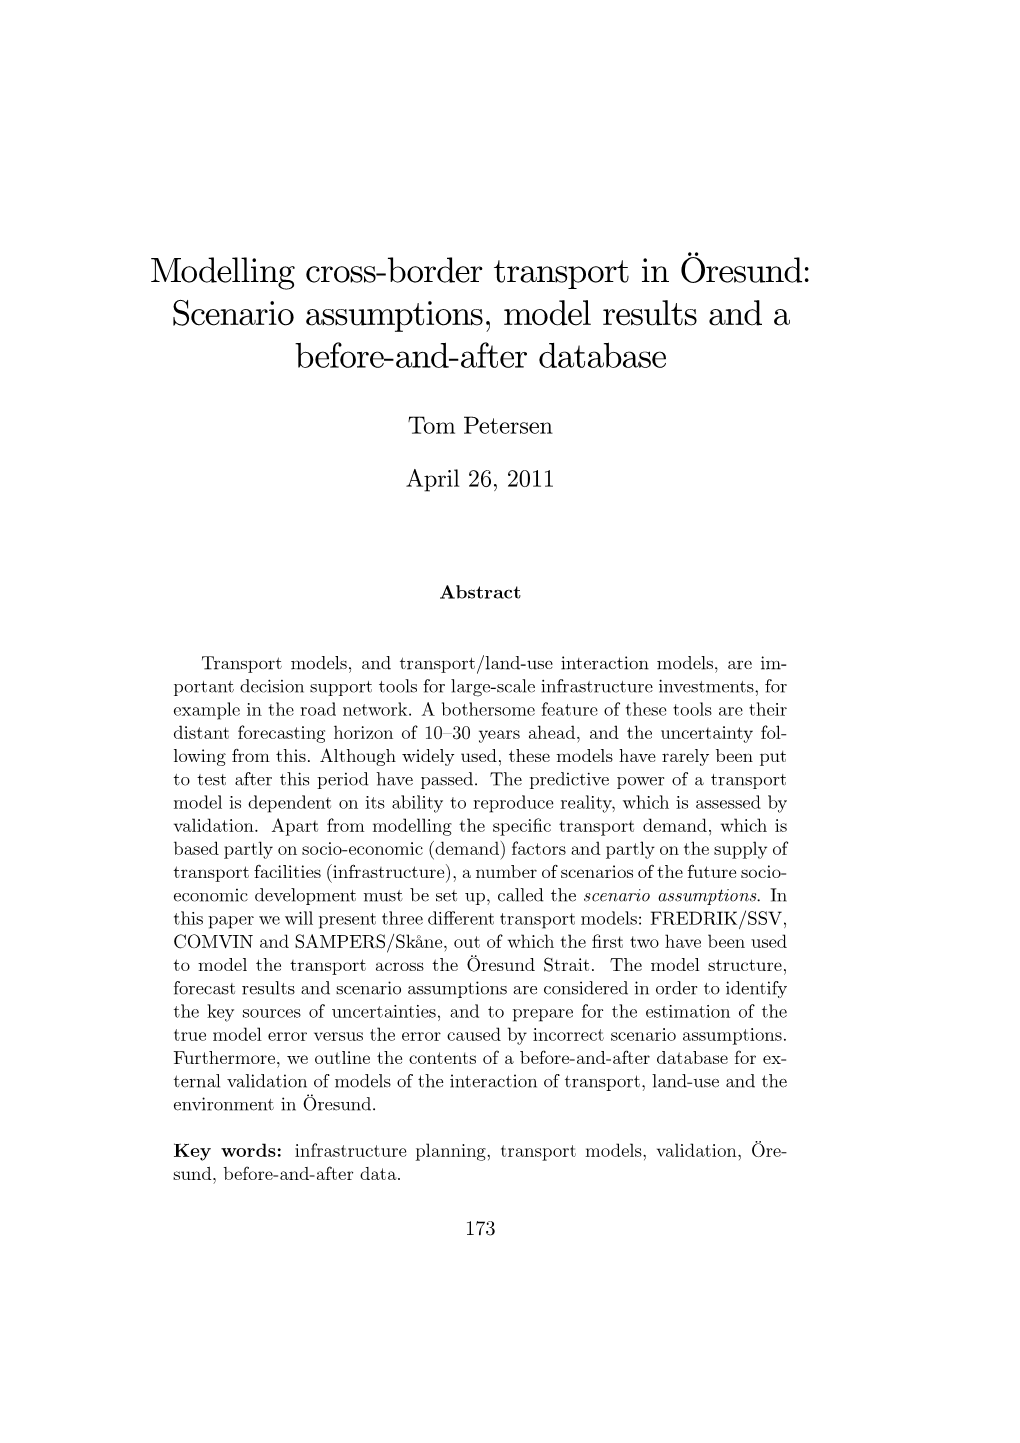 Modelling Cross-Border Transport in Öresund: Scenario Assumptions, Model Results and a Before-And-After Database